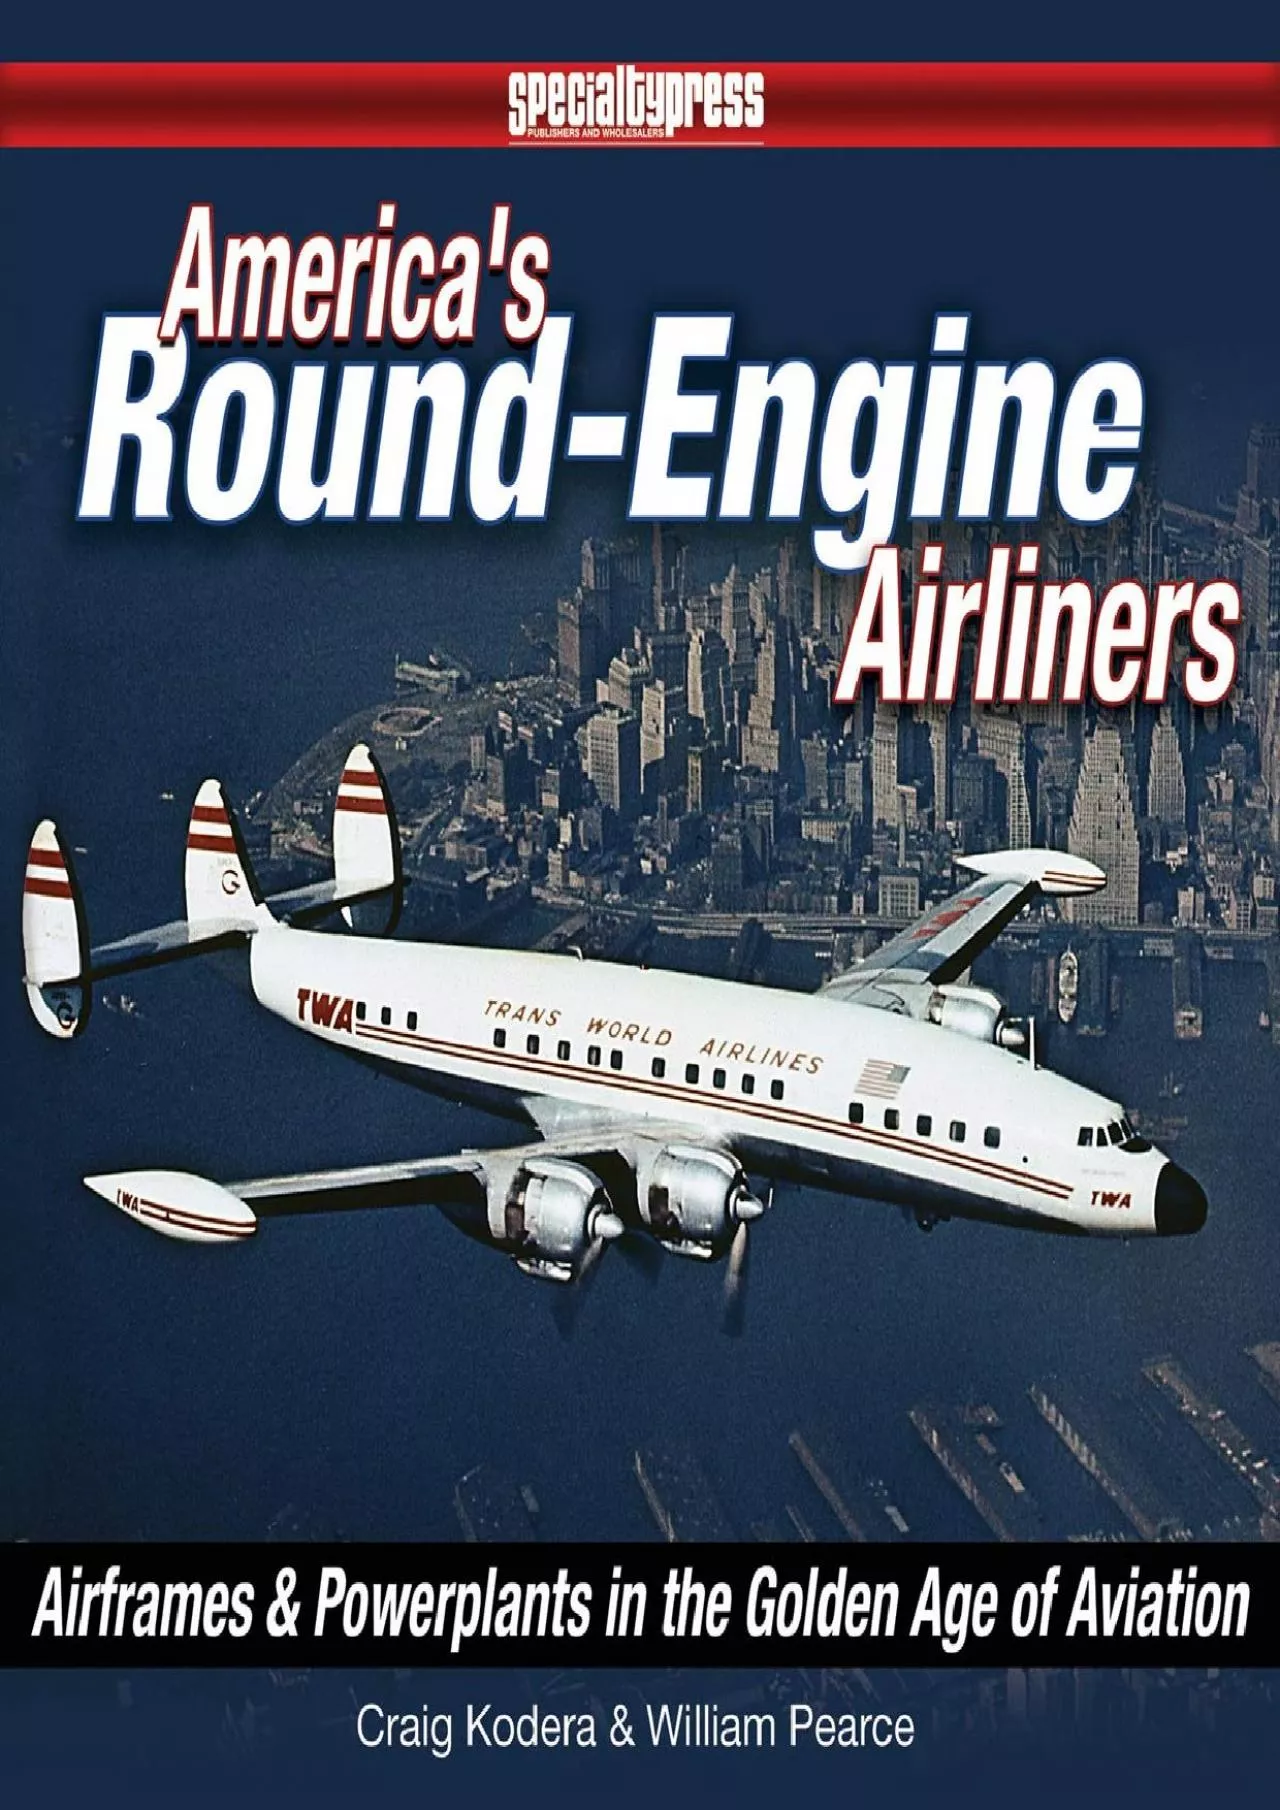 [EBOOK]-America\'s Round-Engine Airliners: Airframes and Powerplants in the Golden Age